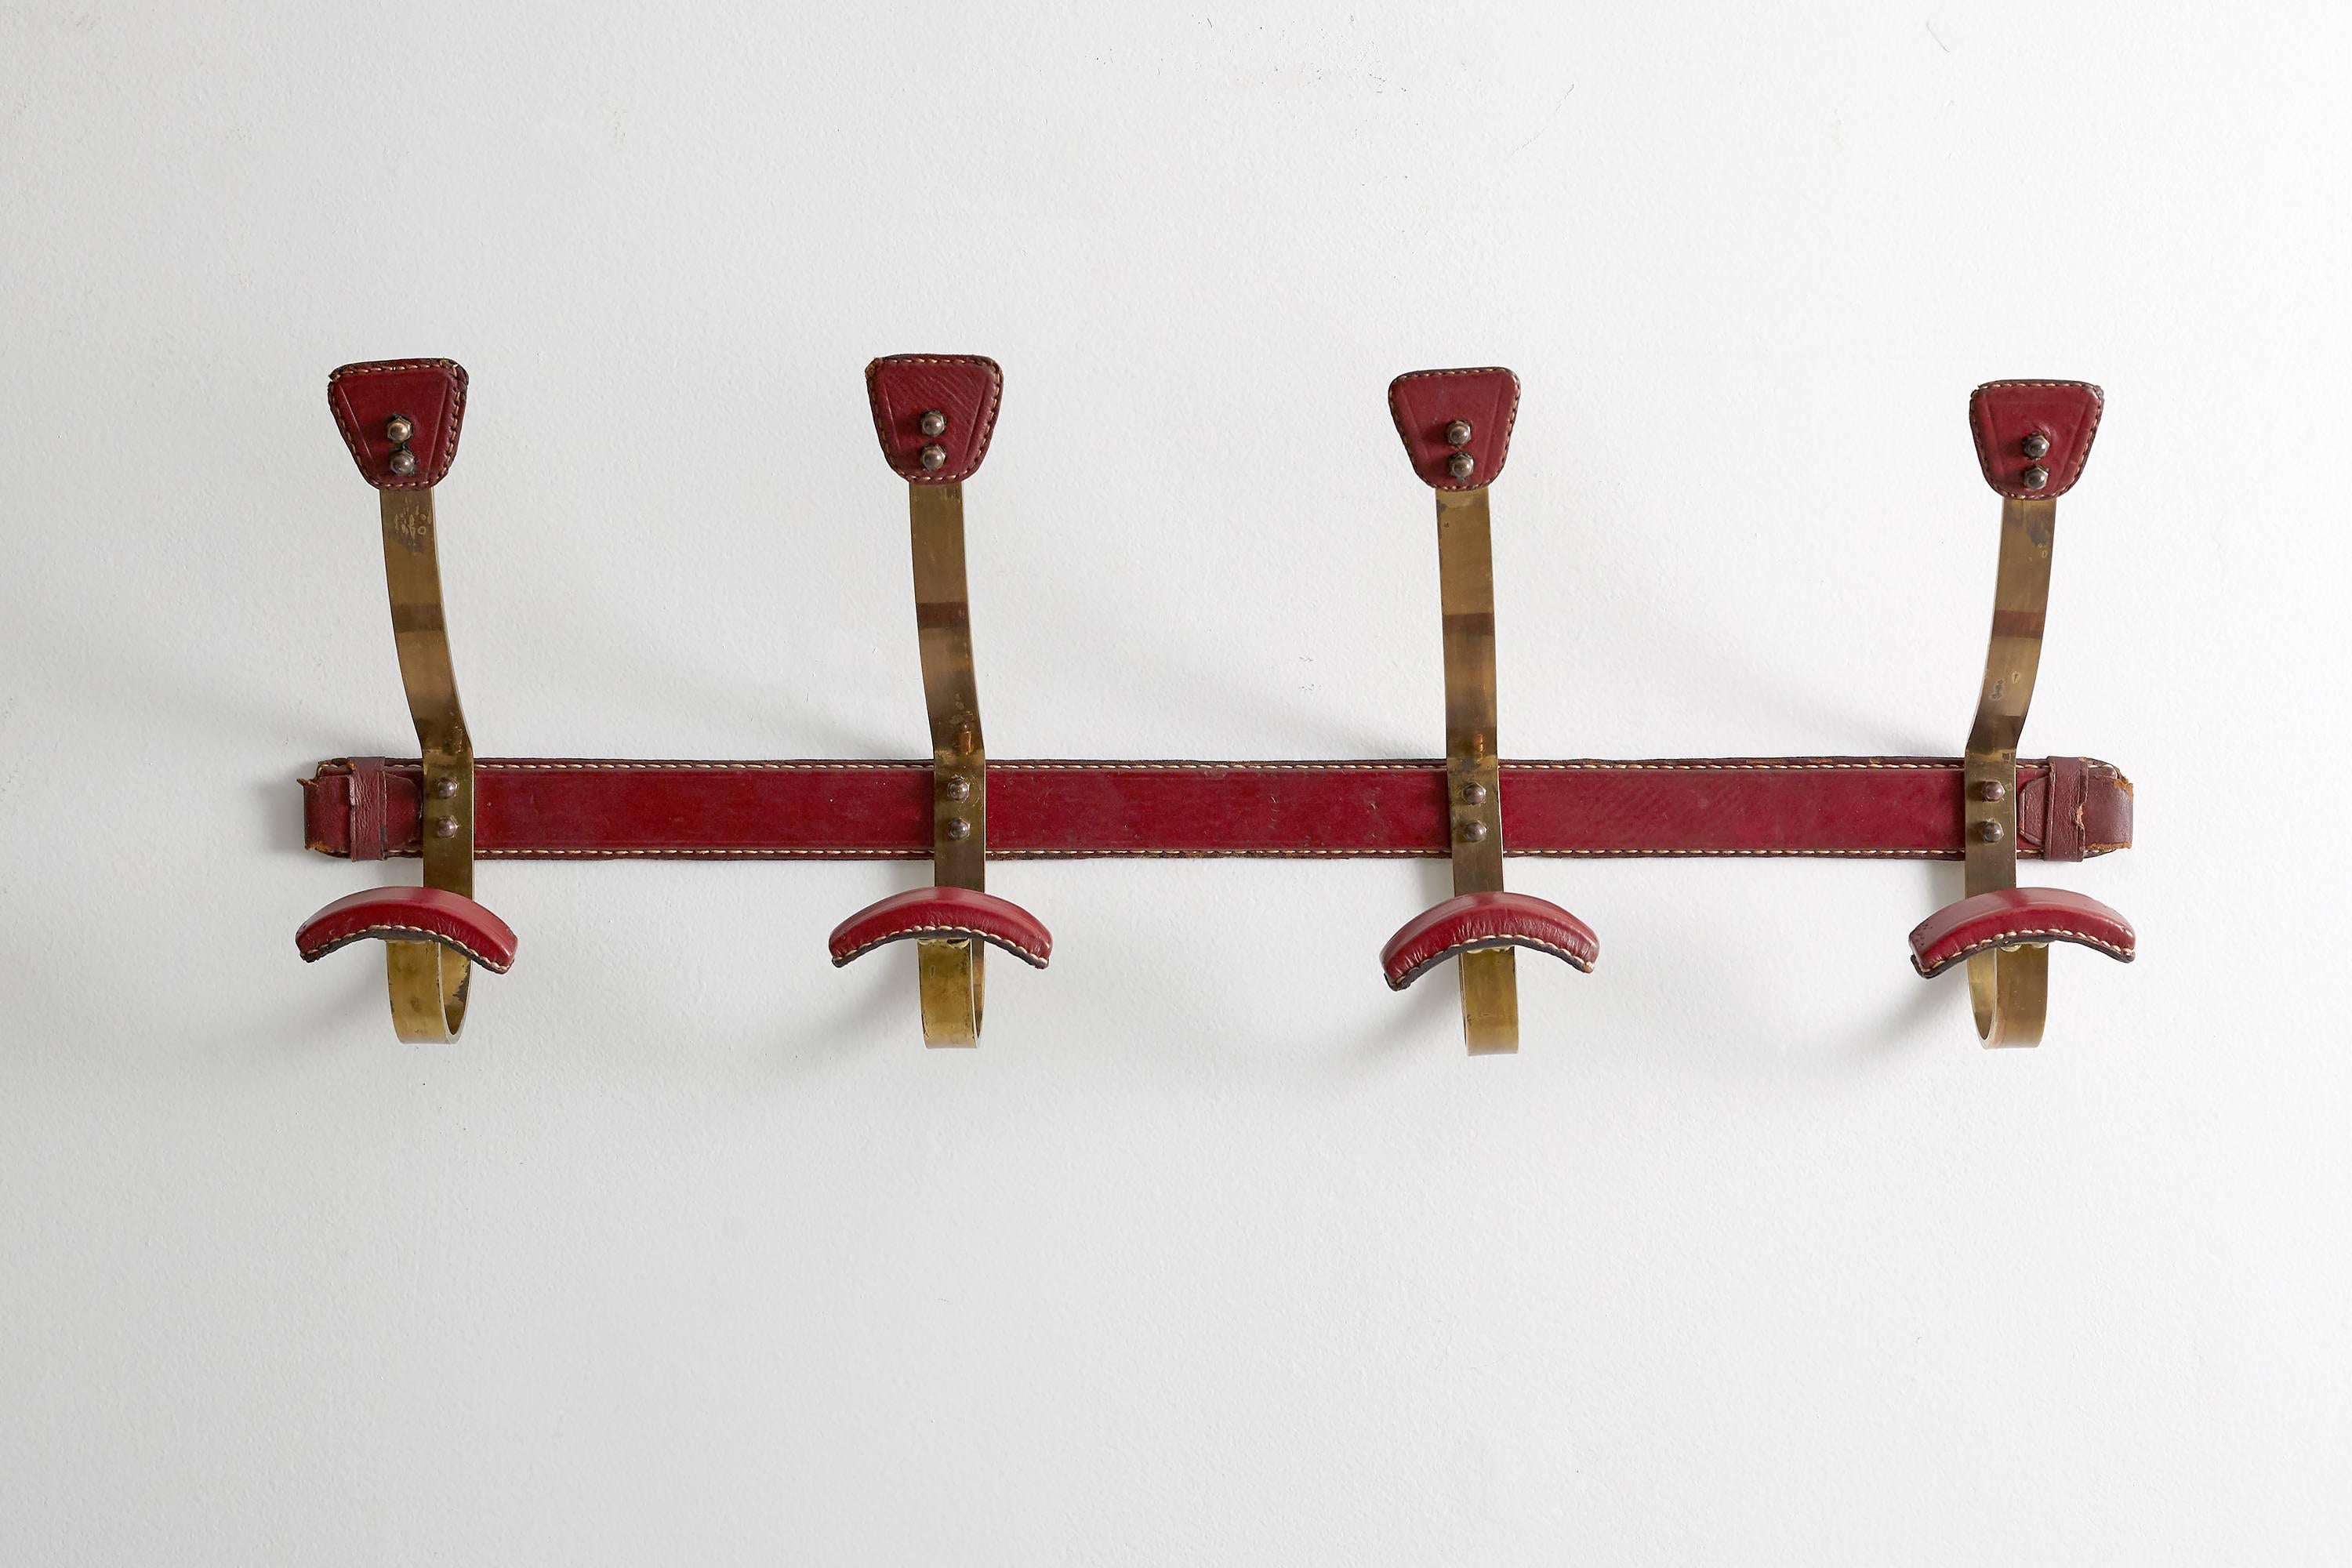 Rich red leather wrapped brass coat rack with signature Adnet leather and contrast stitching.